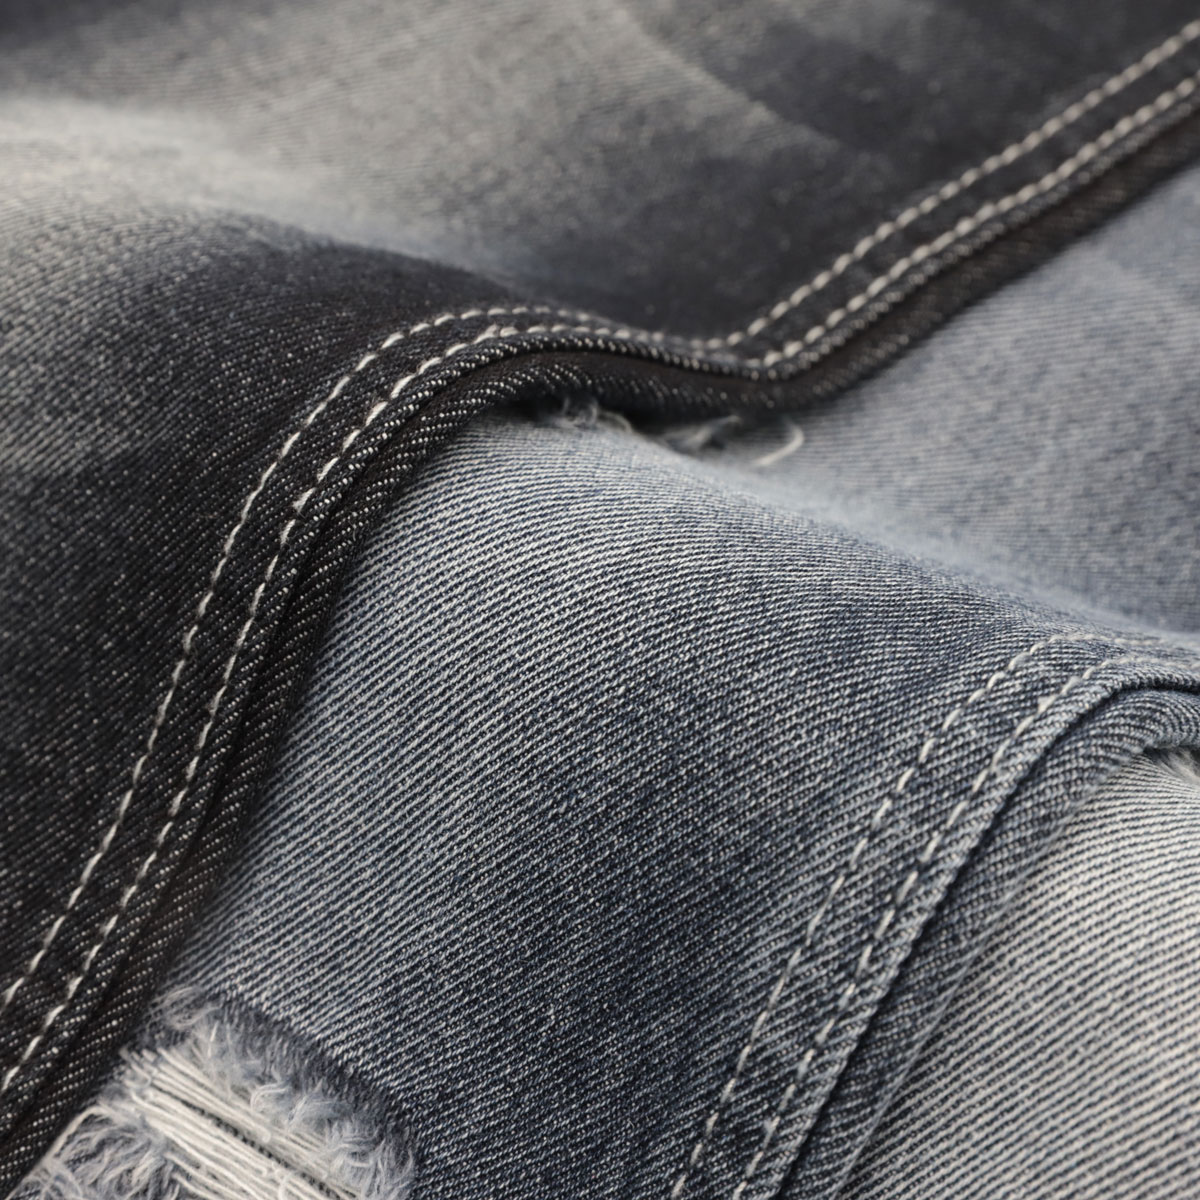 The 5 Best Reasons Why You Should Use a Cotton Spendex Denim Fabric 2